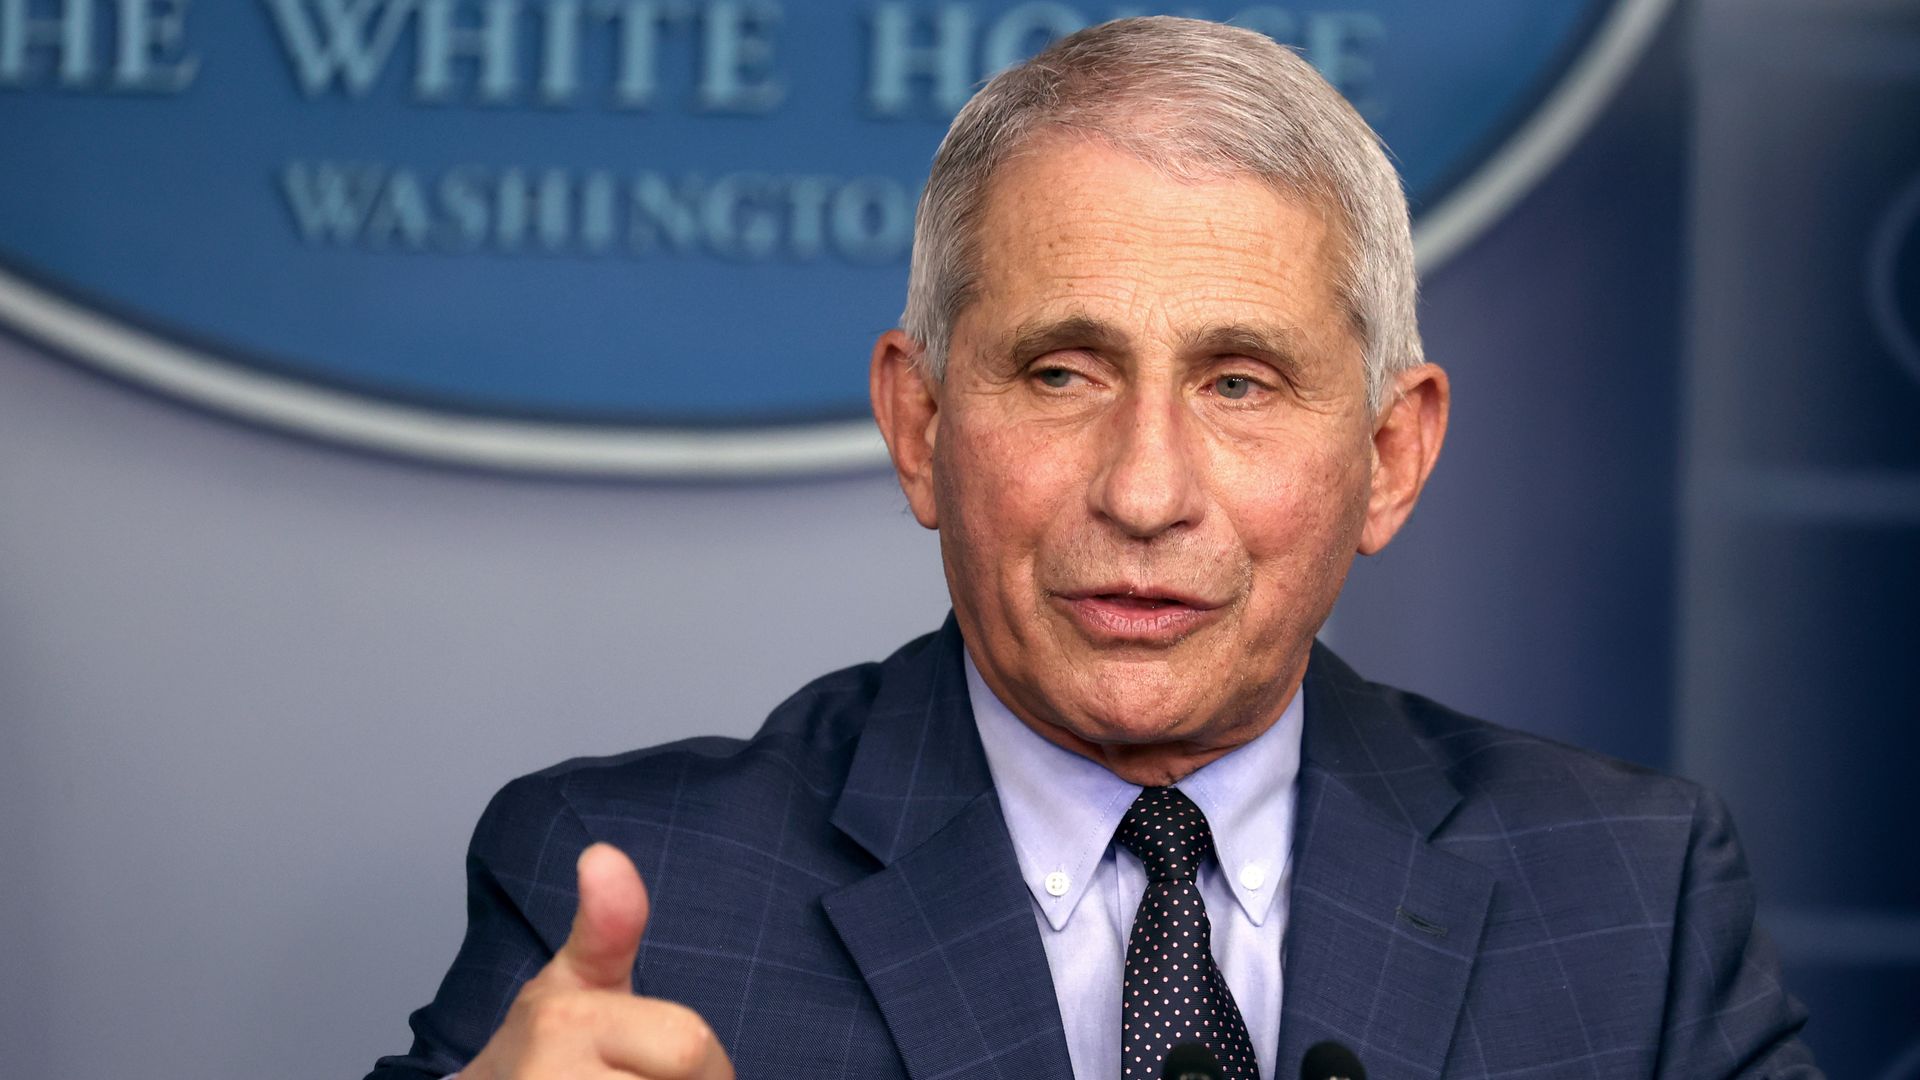 Anthony Fauci speaks during a White House Coronavirus Task Force press briefing in the James Brady Press Briefing Room at the White House on November 19